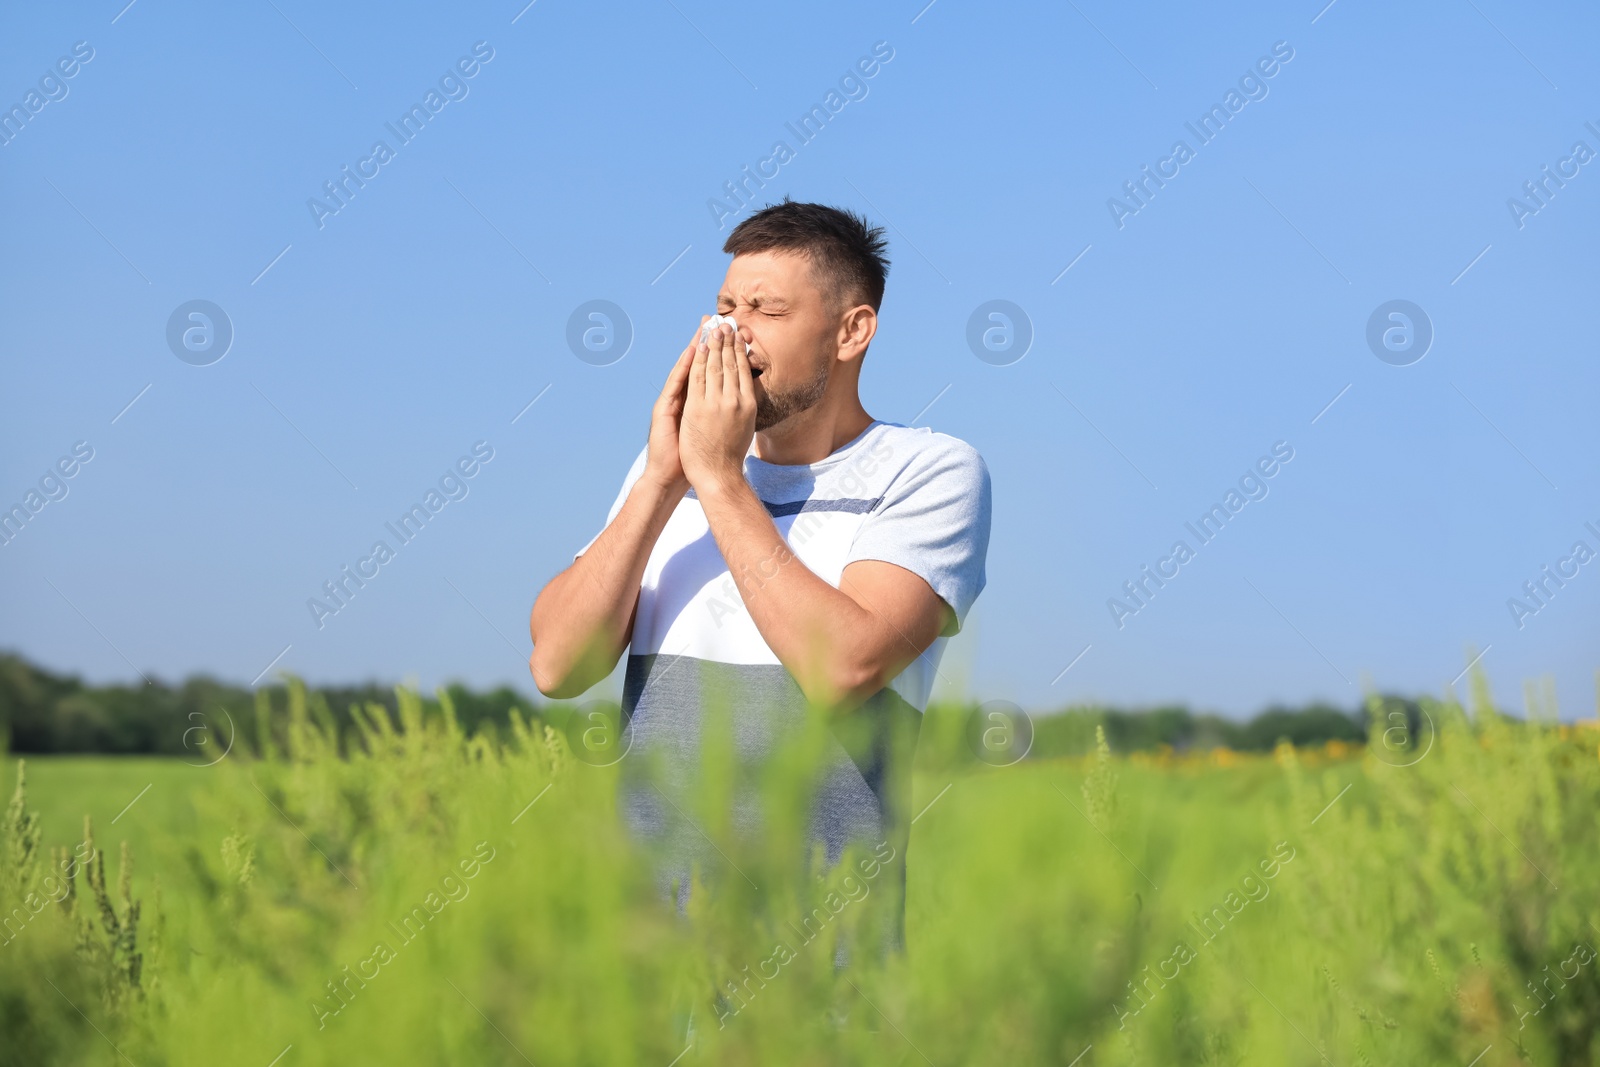 Photo of Man suffering from ragweed allergy outdoors on sunny day